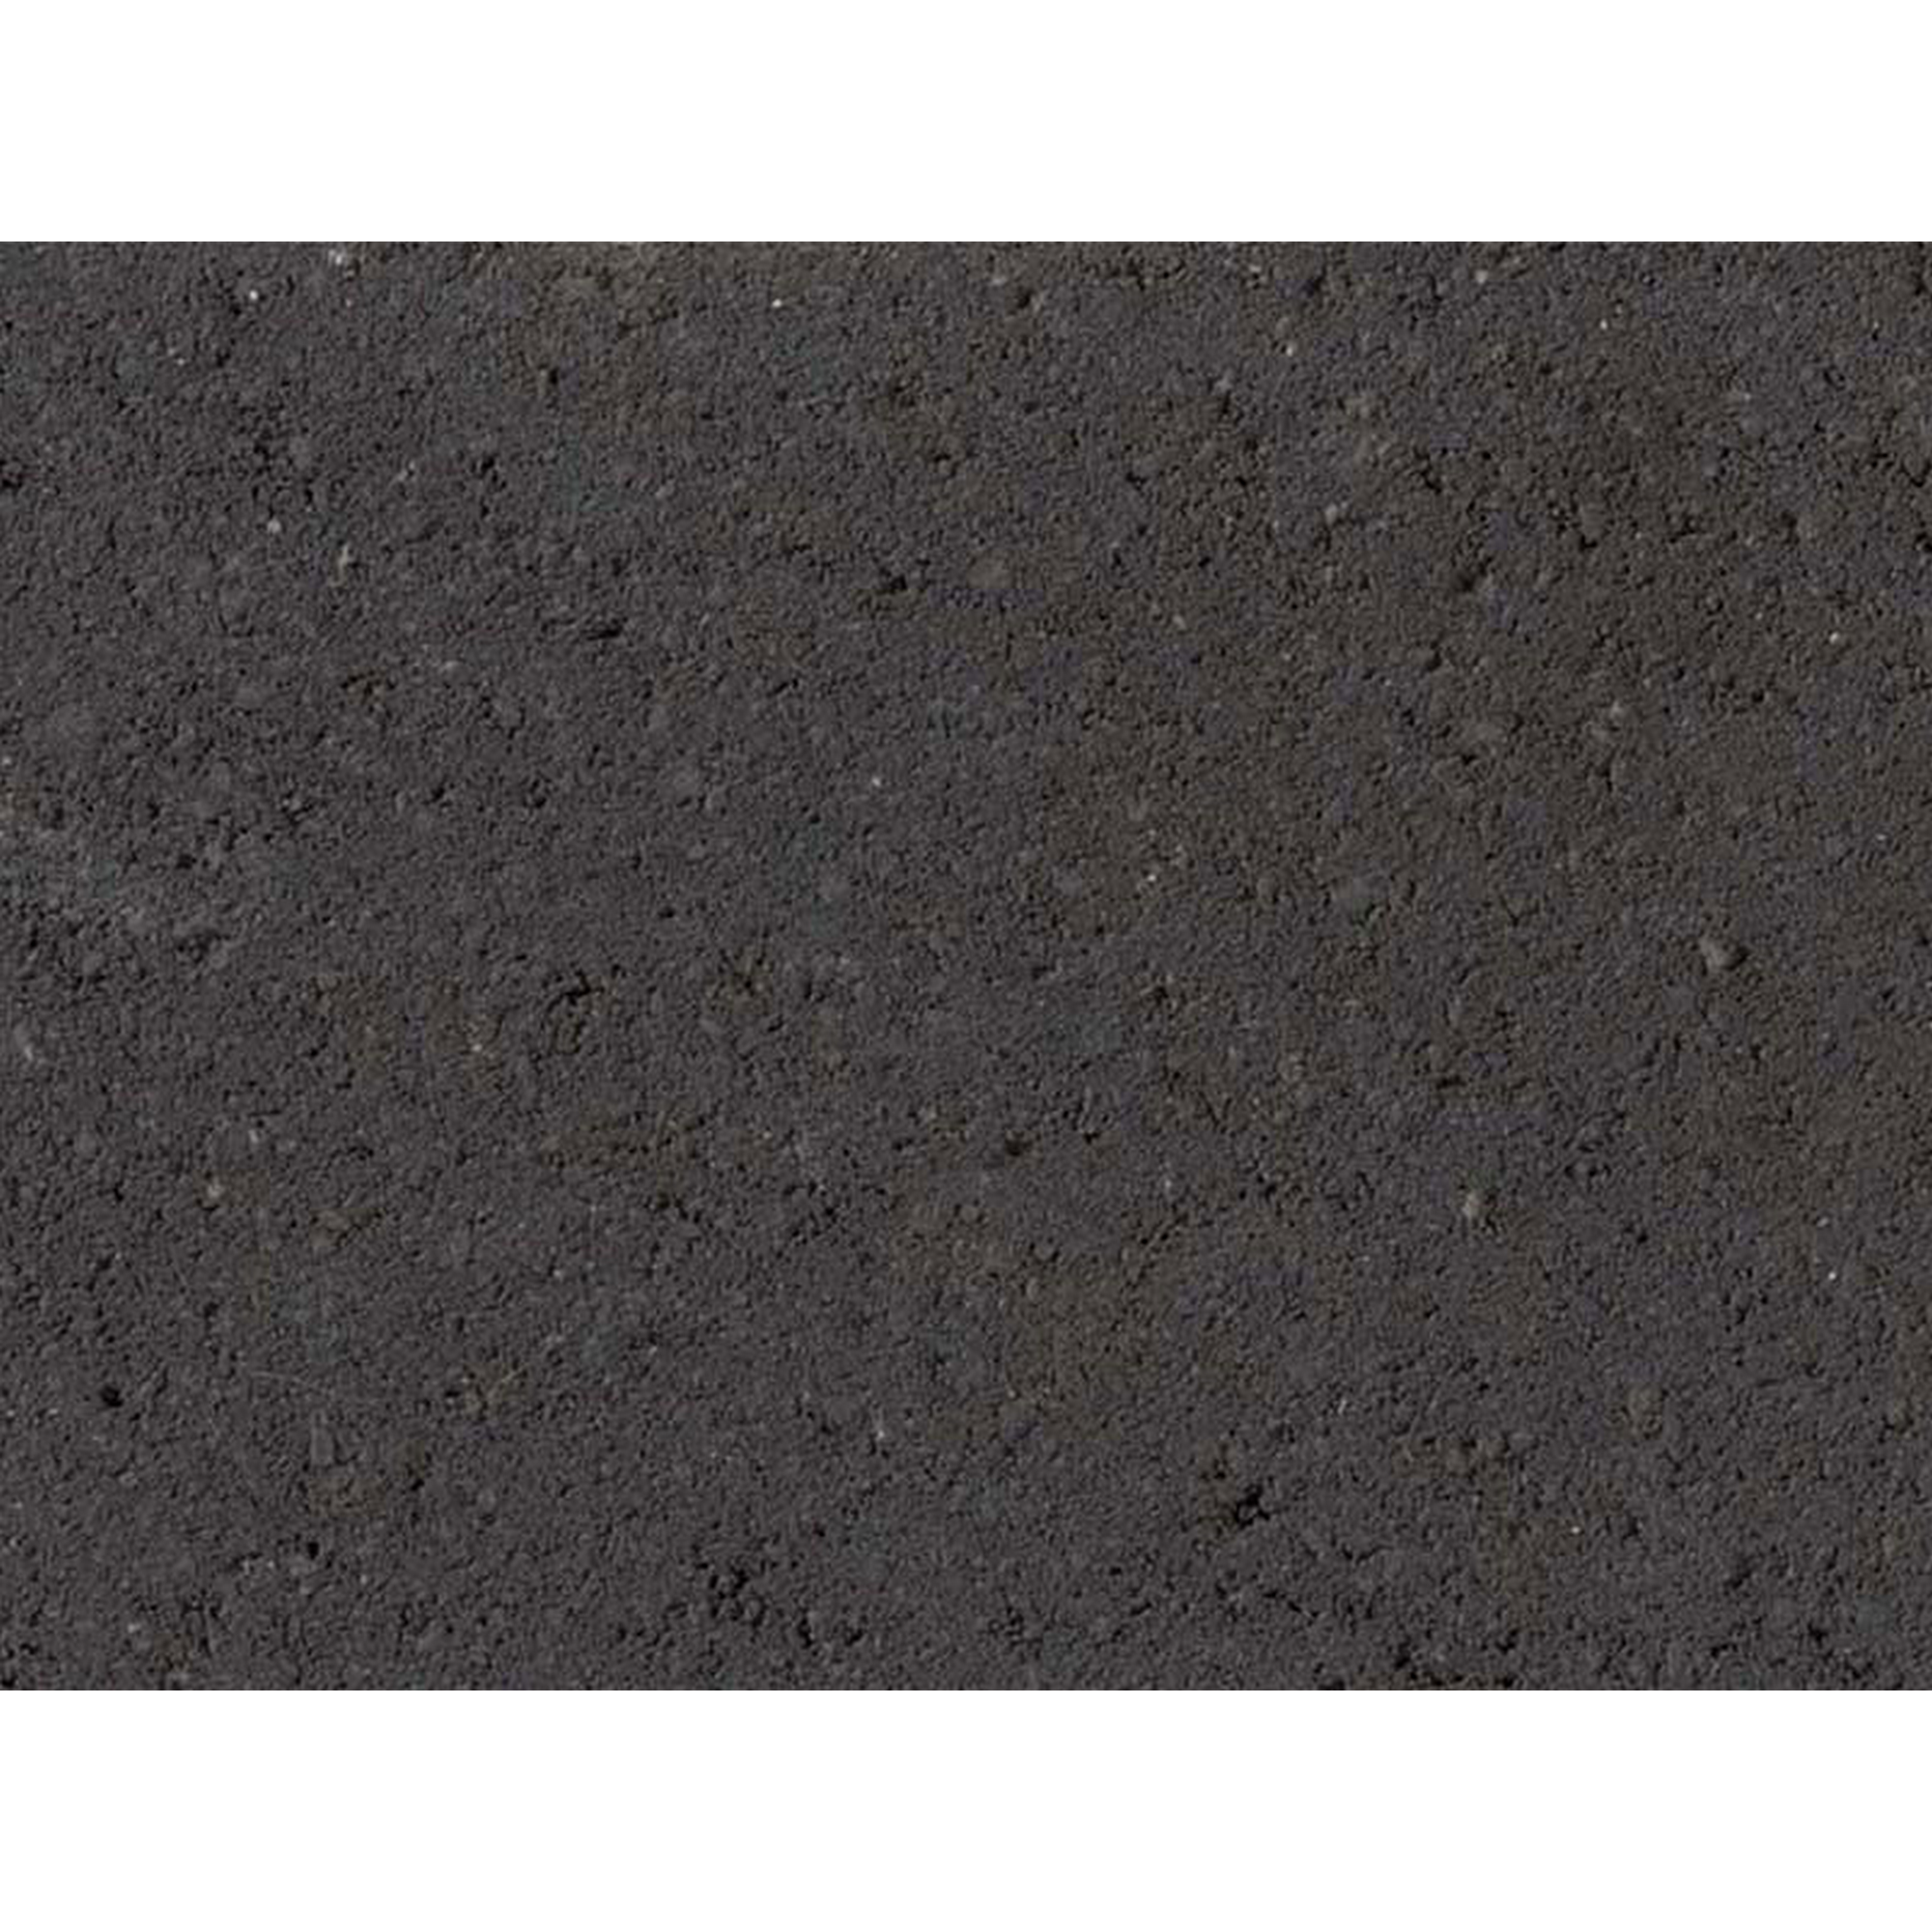 T-Place 'Style' Beton basaltfarben 114 x 82 x 6 cm + product picture